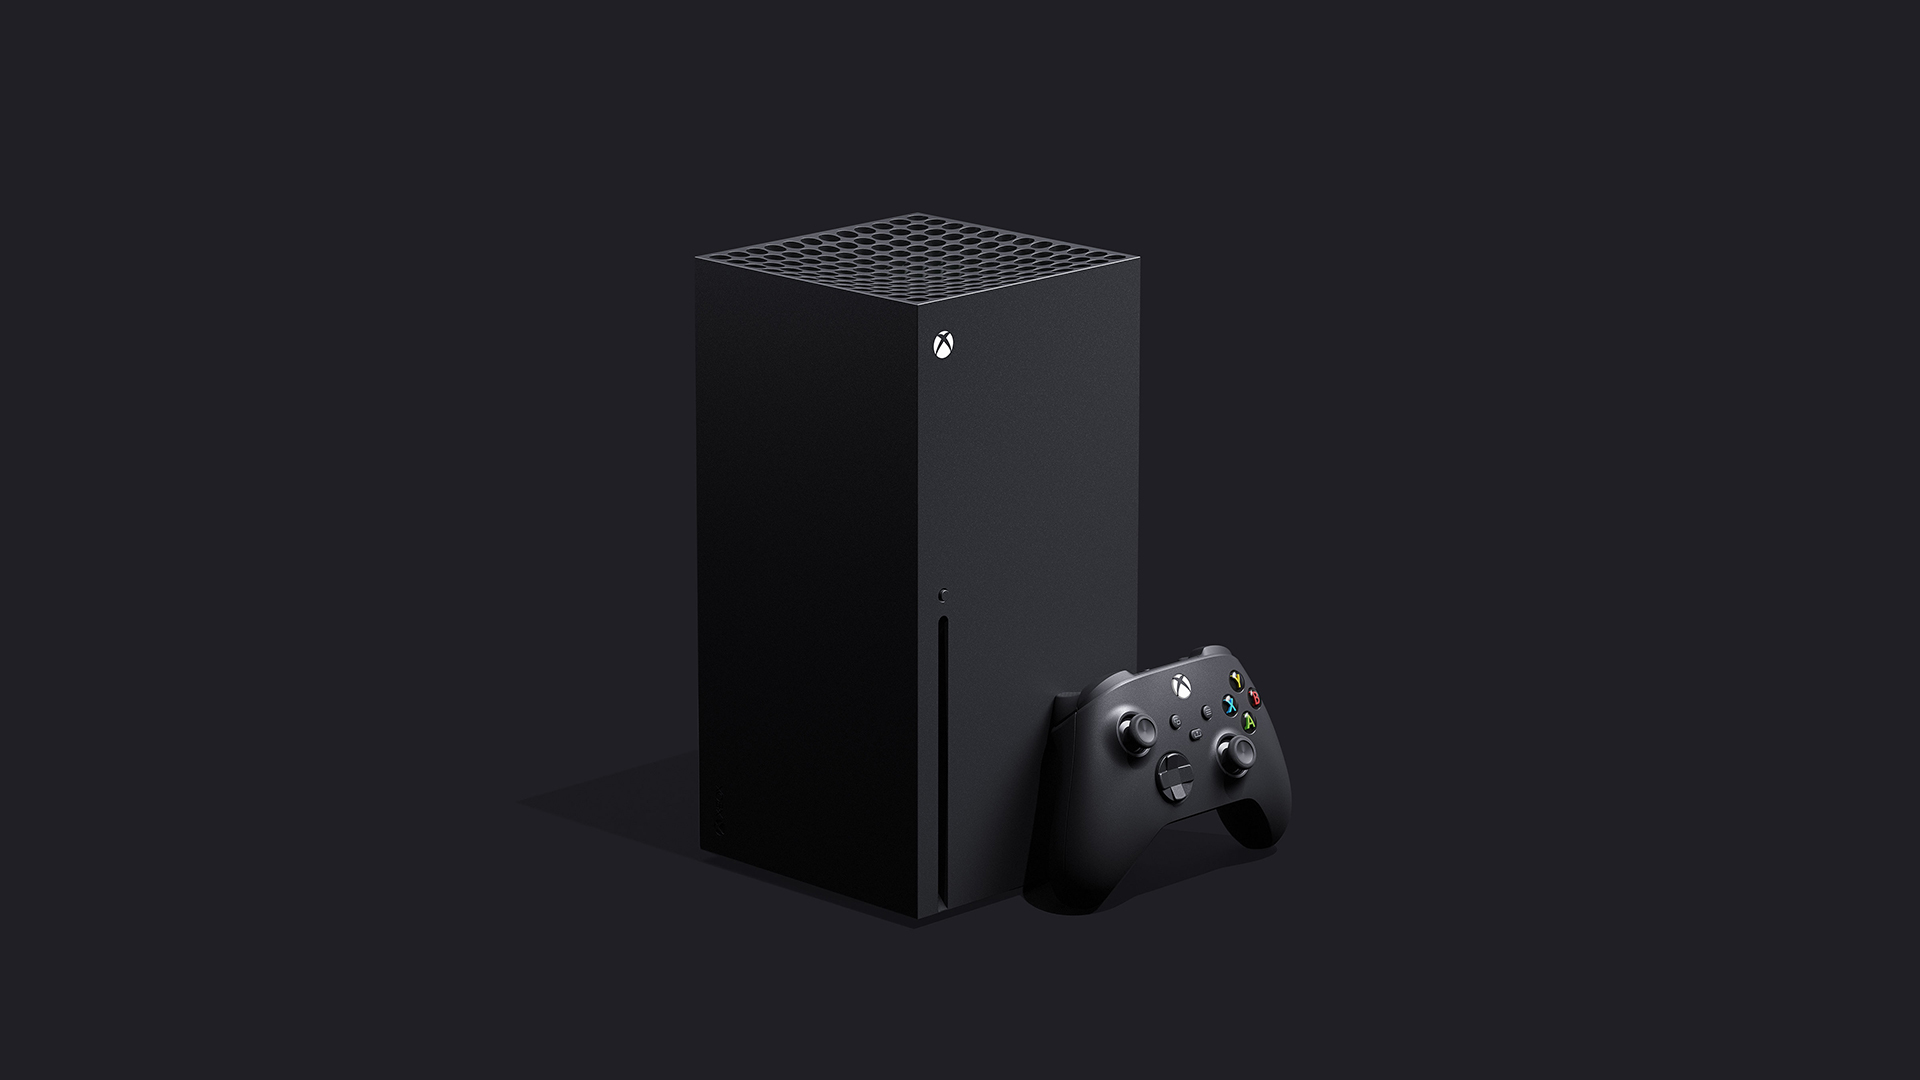 ps5 vs xbox series x which should i buy